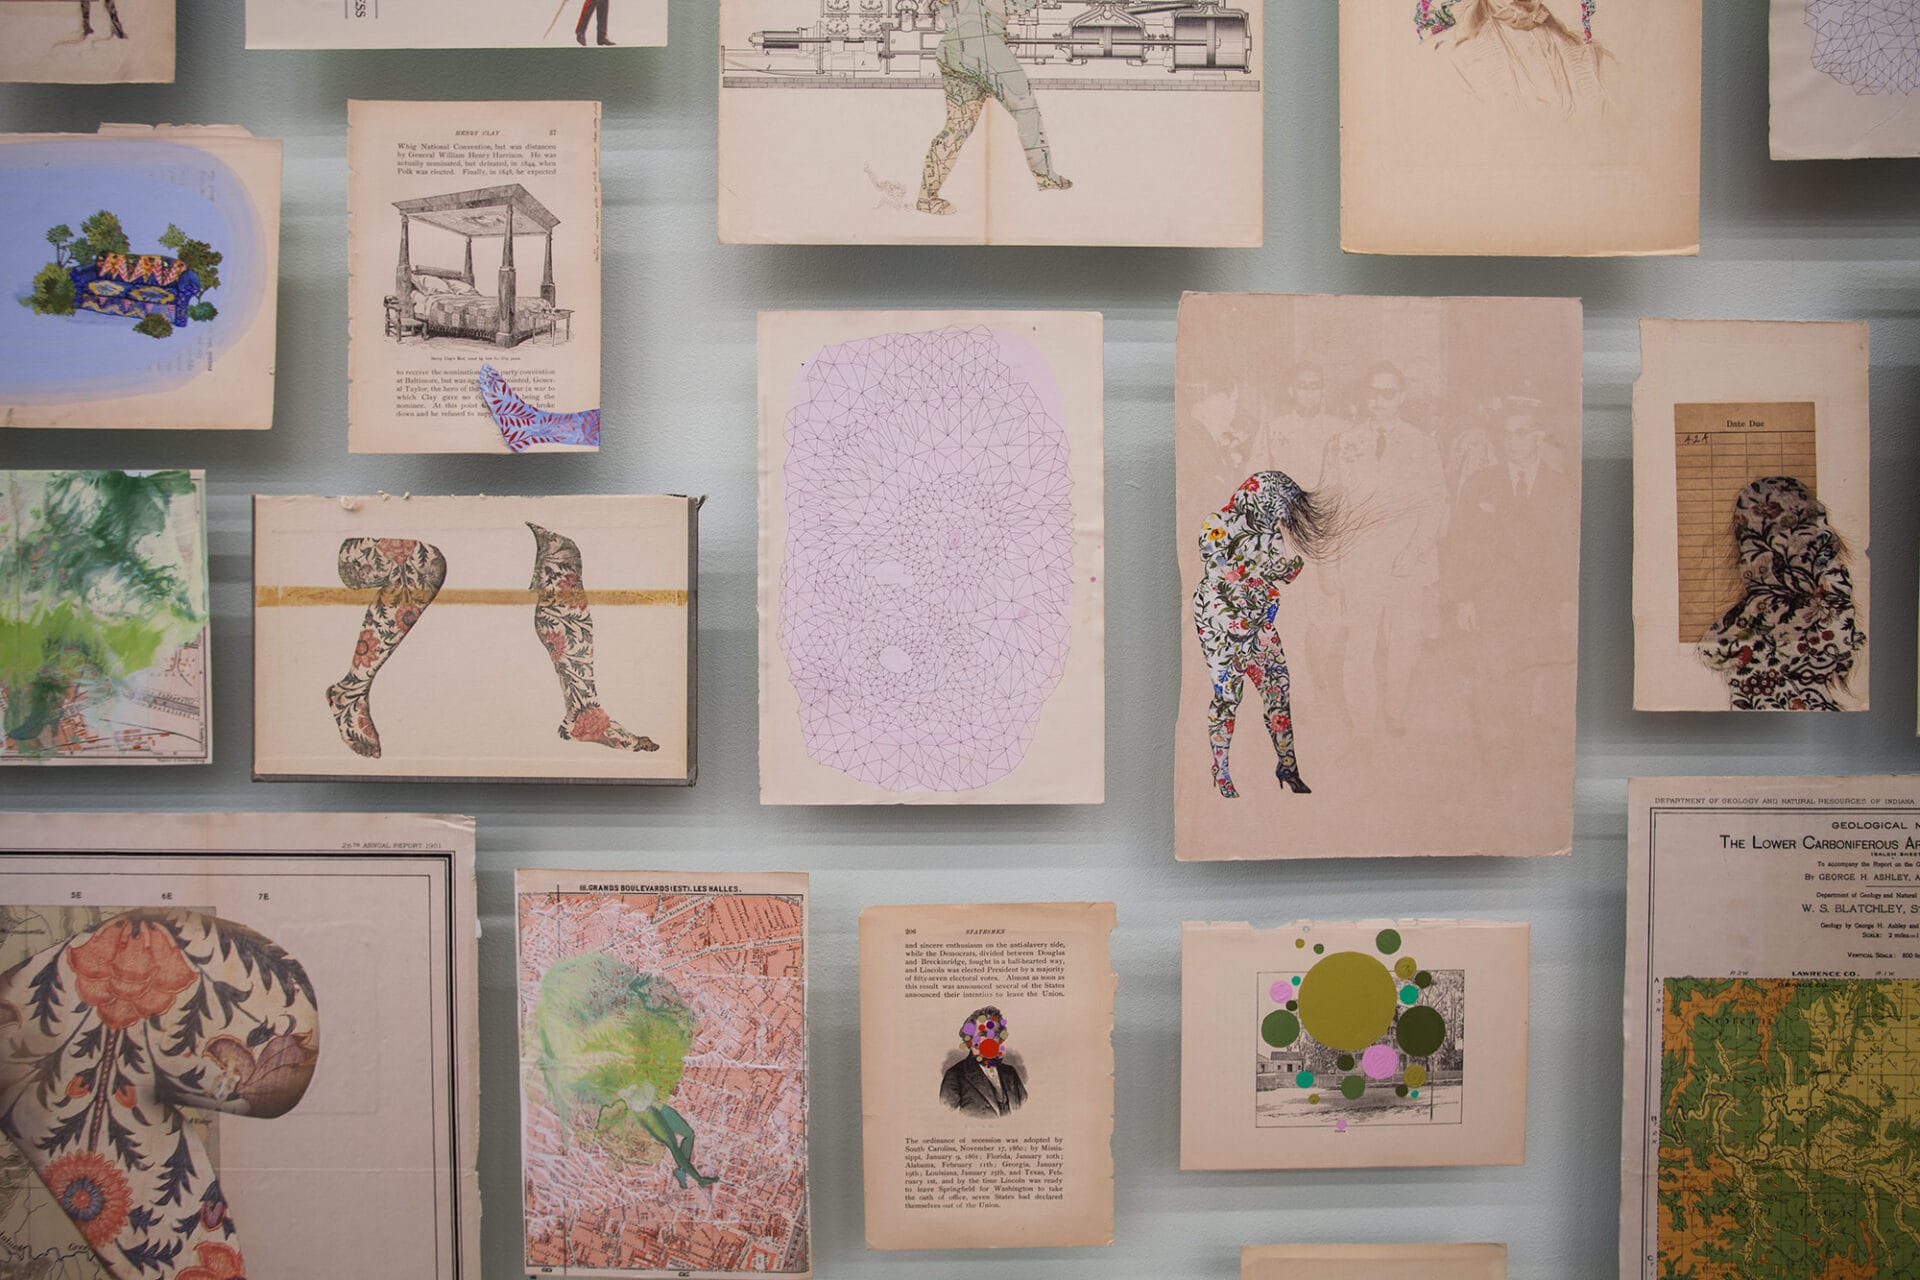 a collection of renderings including floral silhouettes, architectural renderings, and portraits on found book pages arranged on a wall